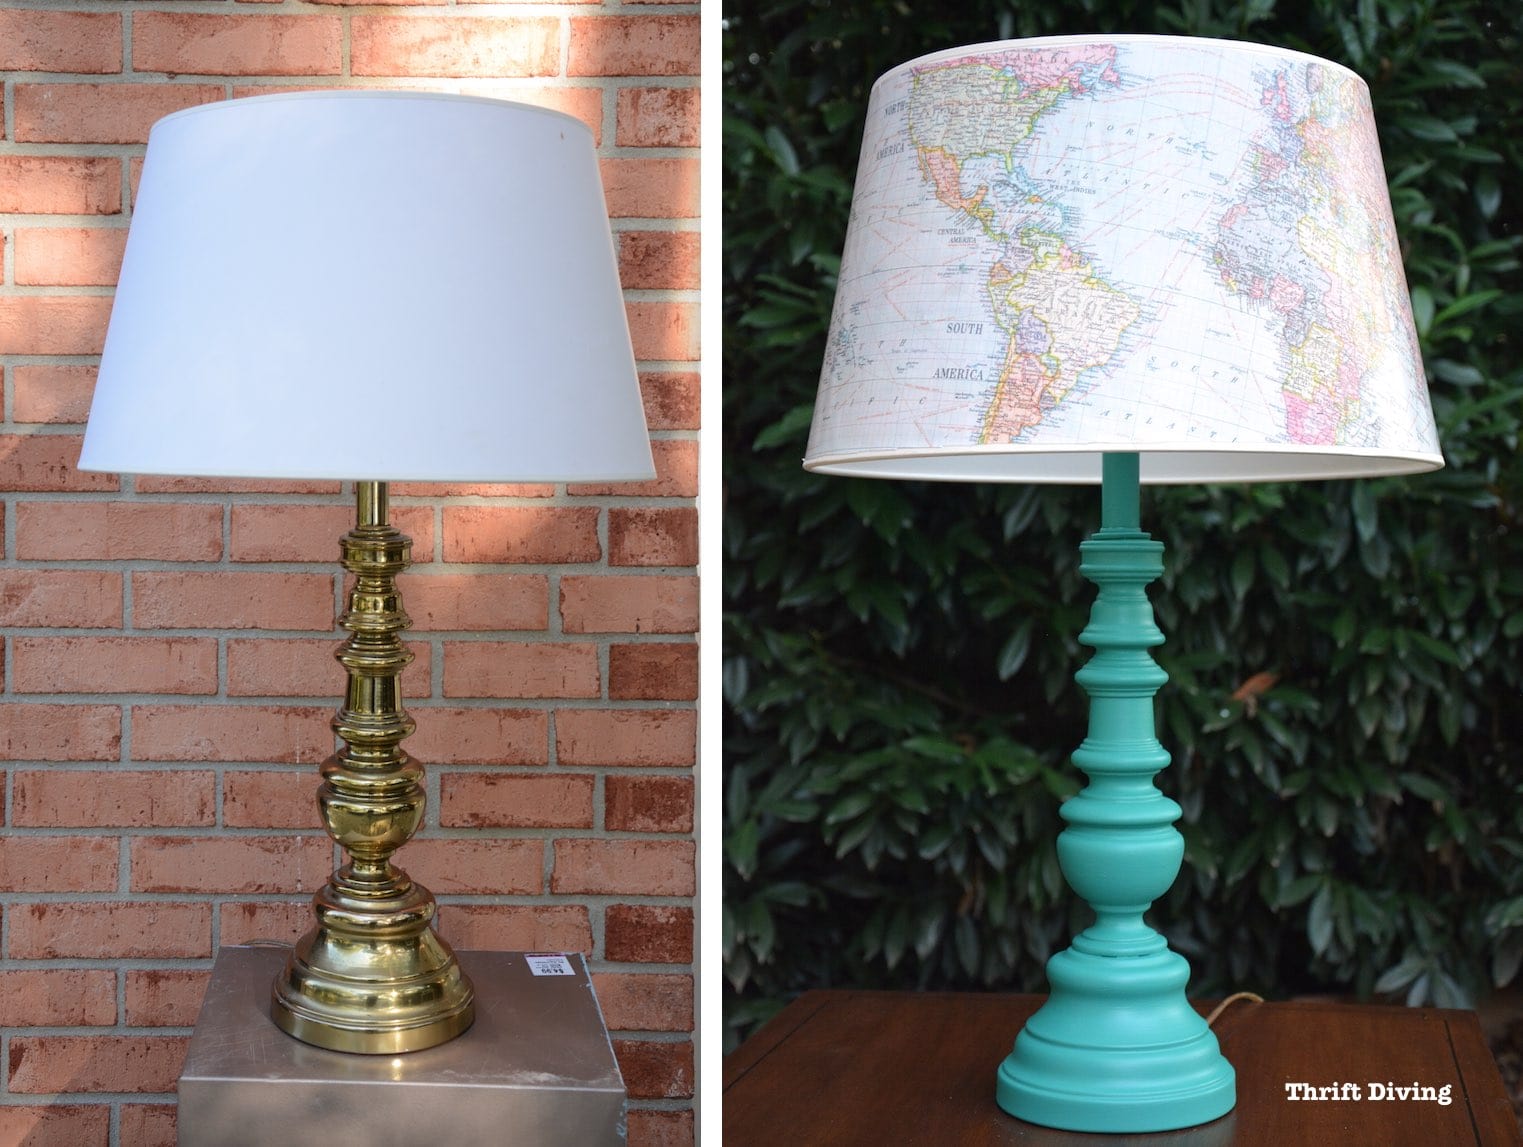 Thrifted End Table and Lamp Makeover - Pretty turquoise lamp makeover - Thrift Diving